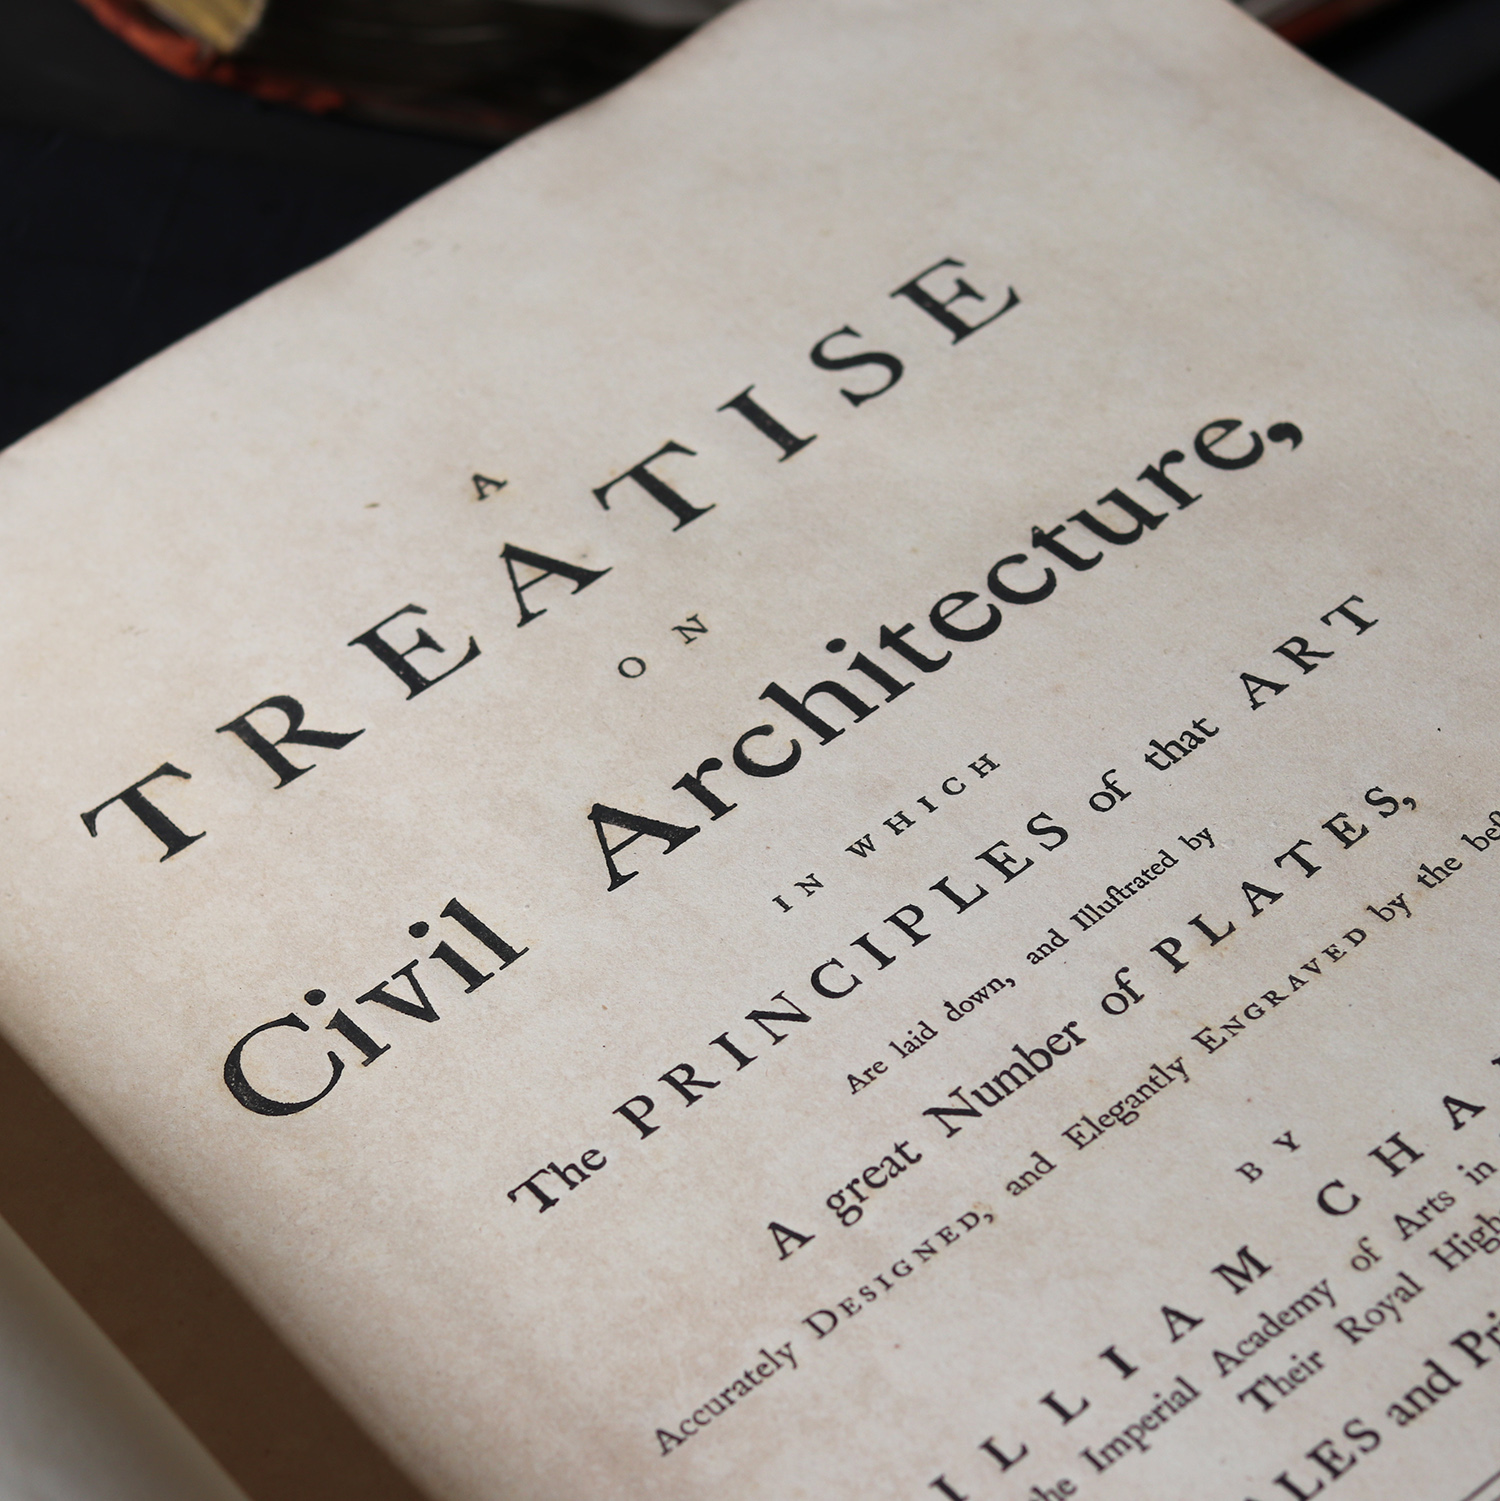 The title page of William Chambers' Treatise on Civic Architecture